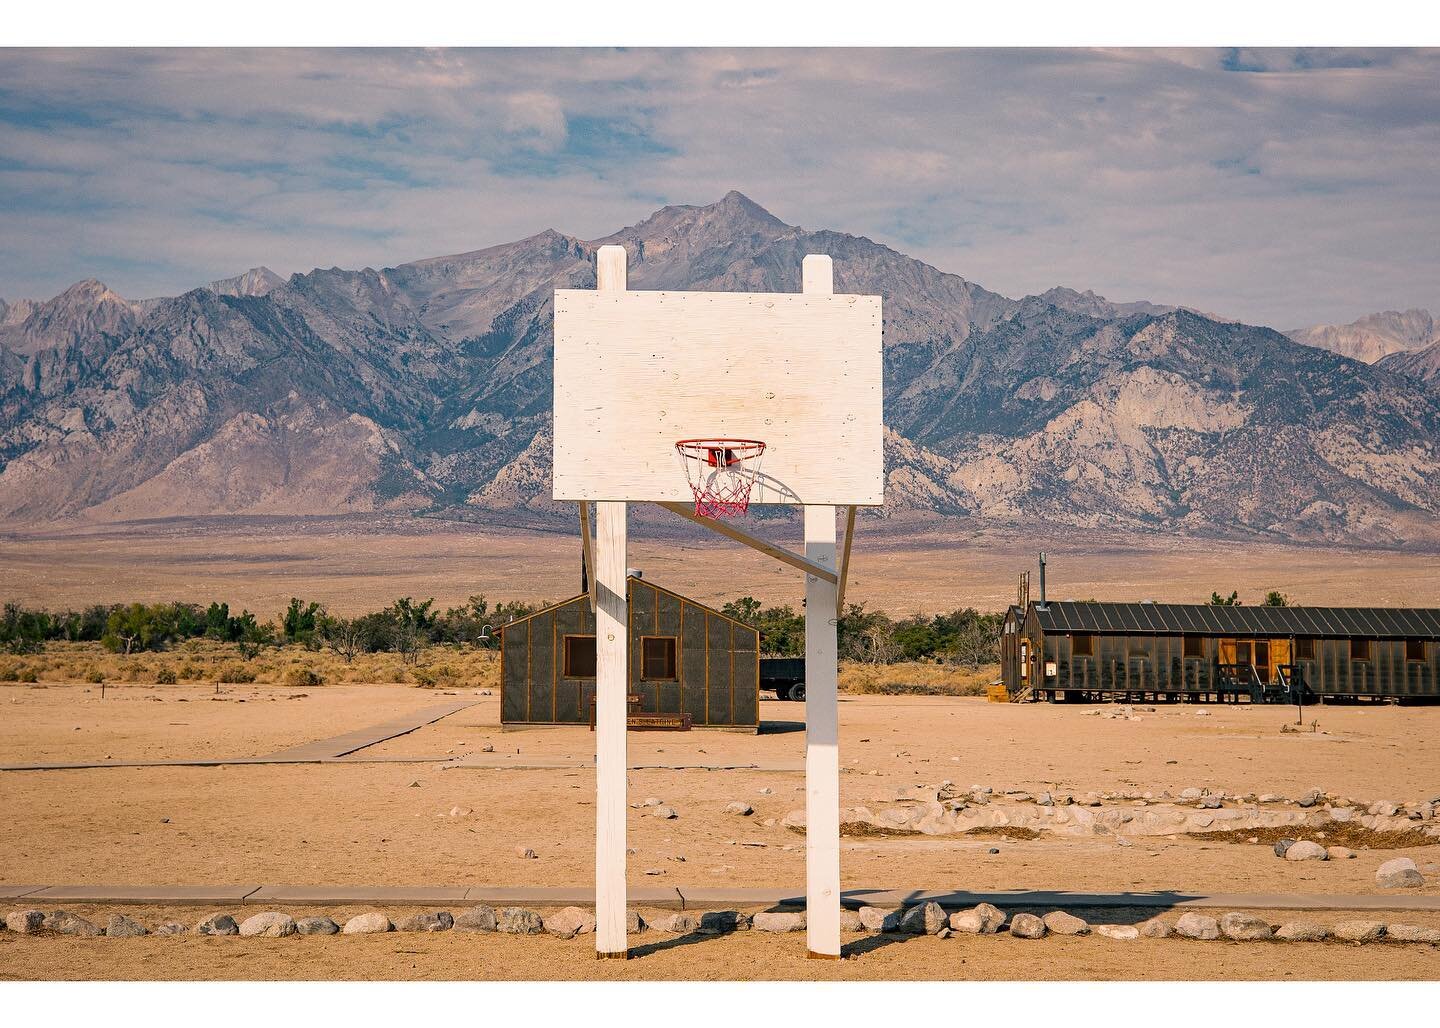 Facing Mount Whitney and the Sierras to the west, and Death Valley to the east. 

The basketball court at Manzanar, one of ten Japanese incarceration camps in the western United States, stands where it stood 80 years ago today. 

Shoutout to @thefran